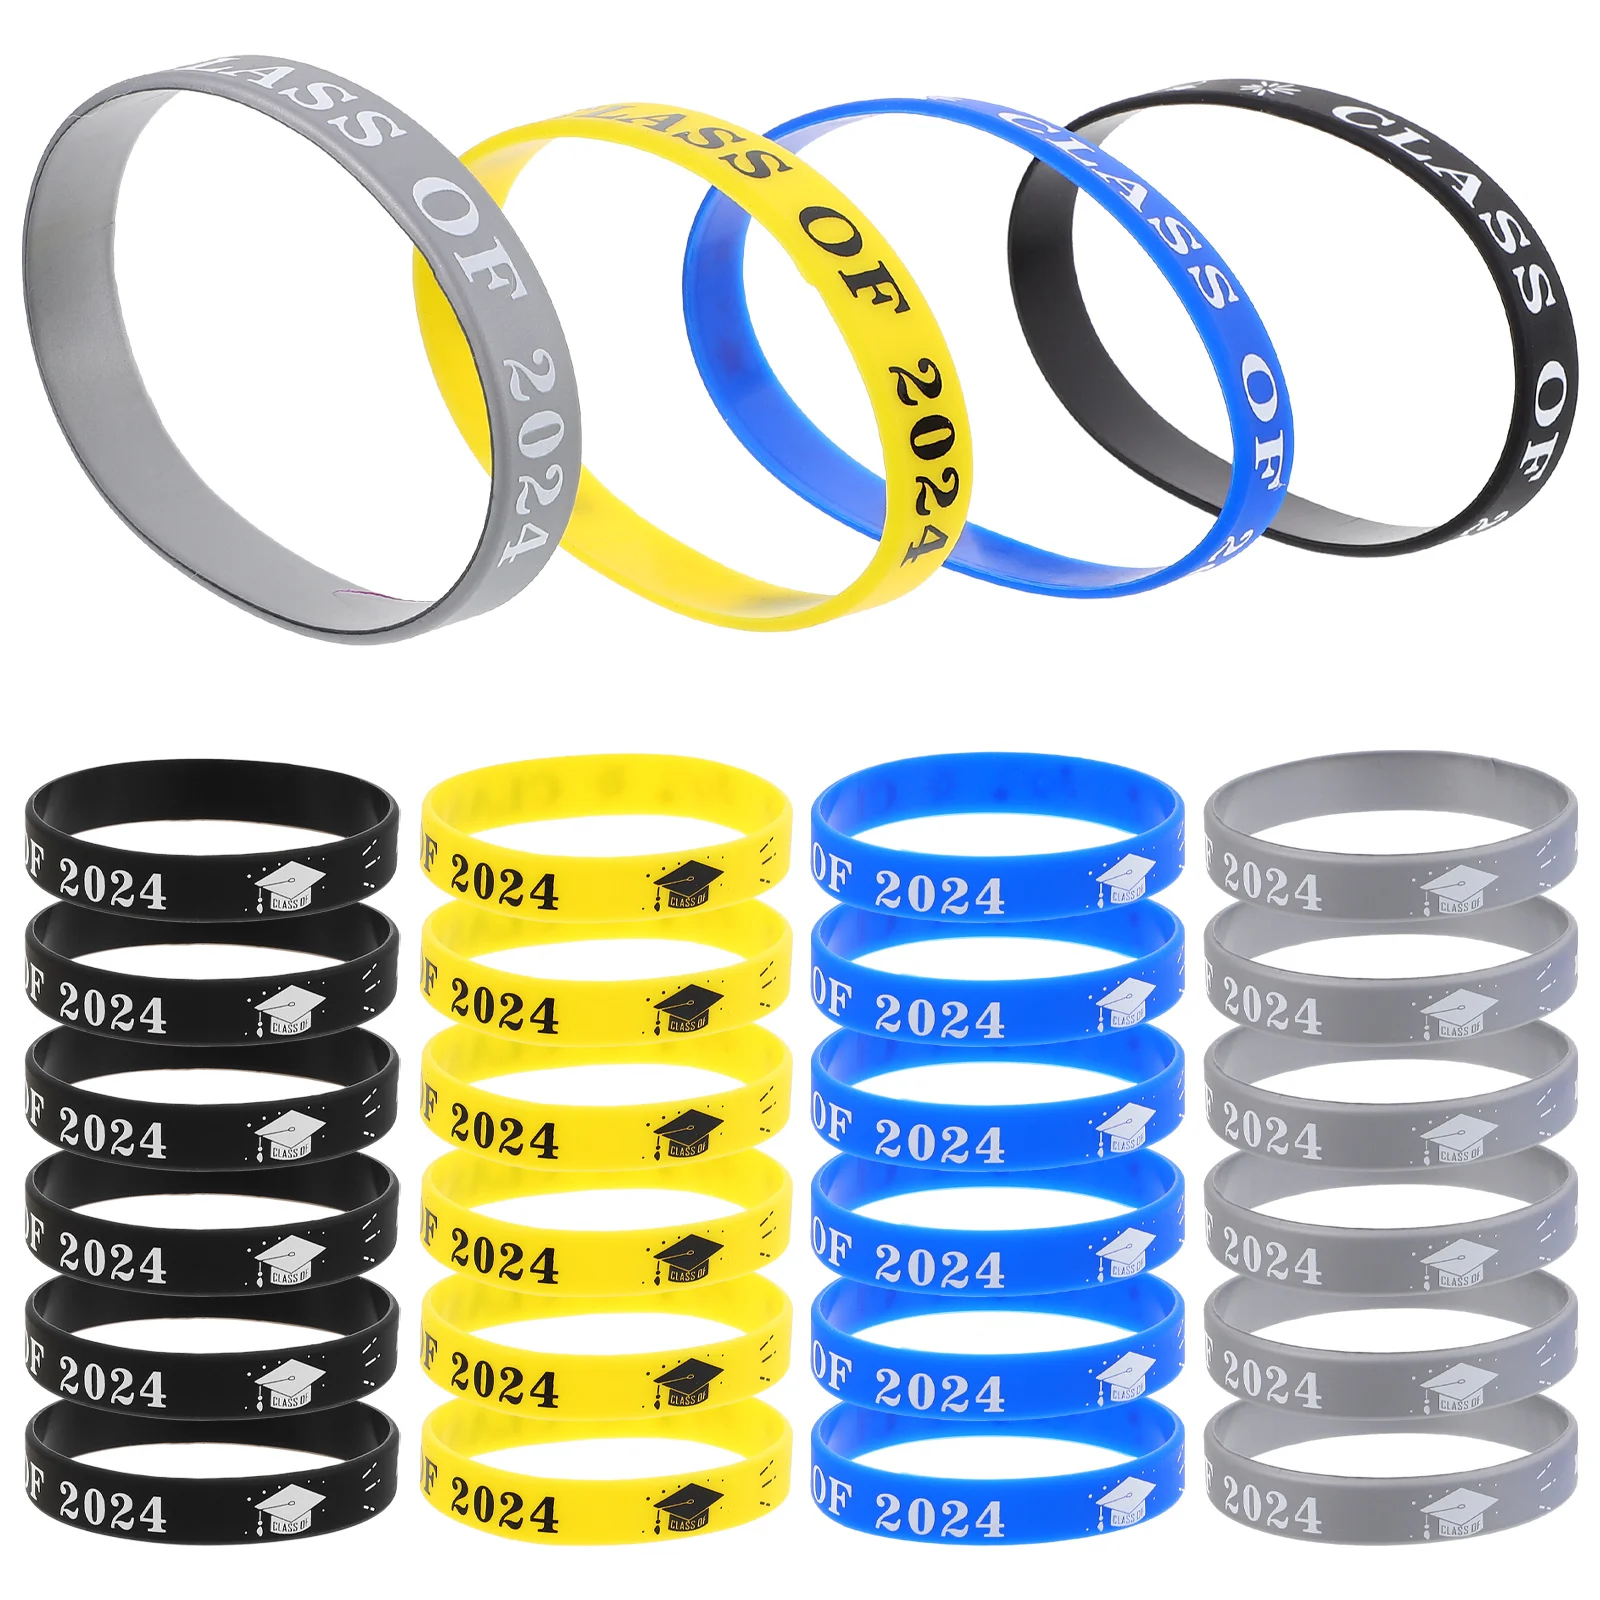 

24 Pcs Graduation Silicone Bracelet Decor for Wristband Class of 2024 Chic Portable Silica Gel Student Party Accessory